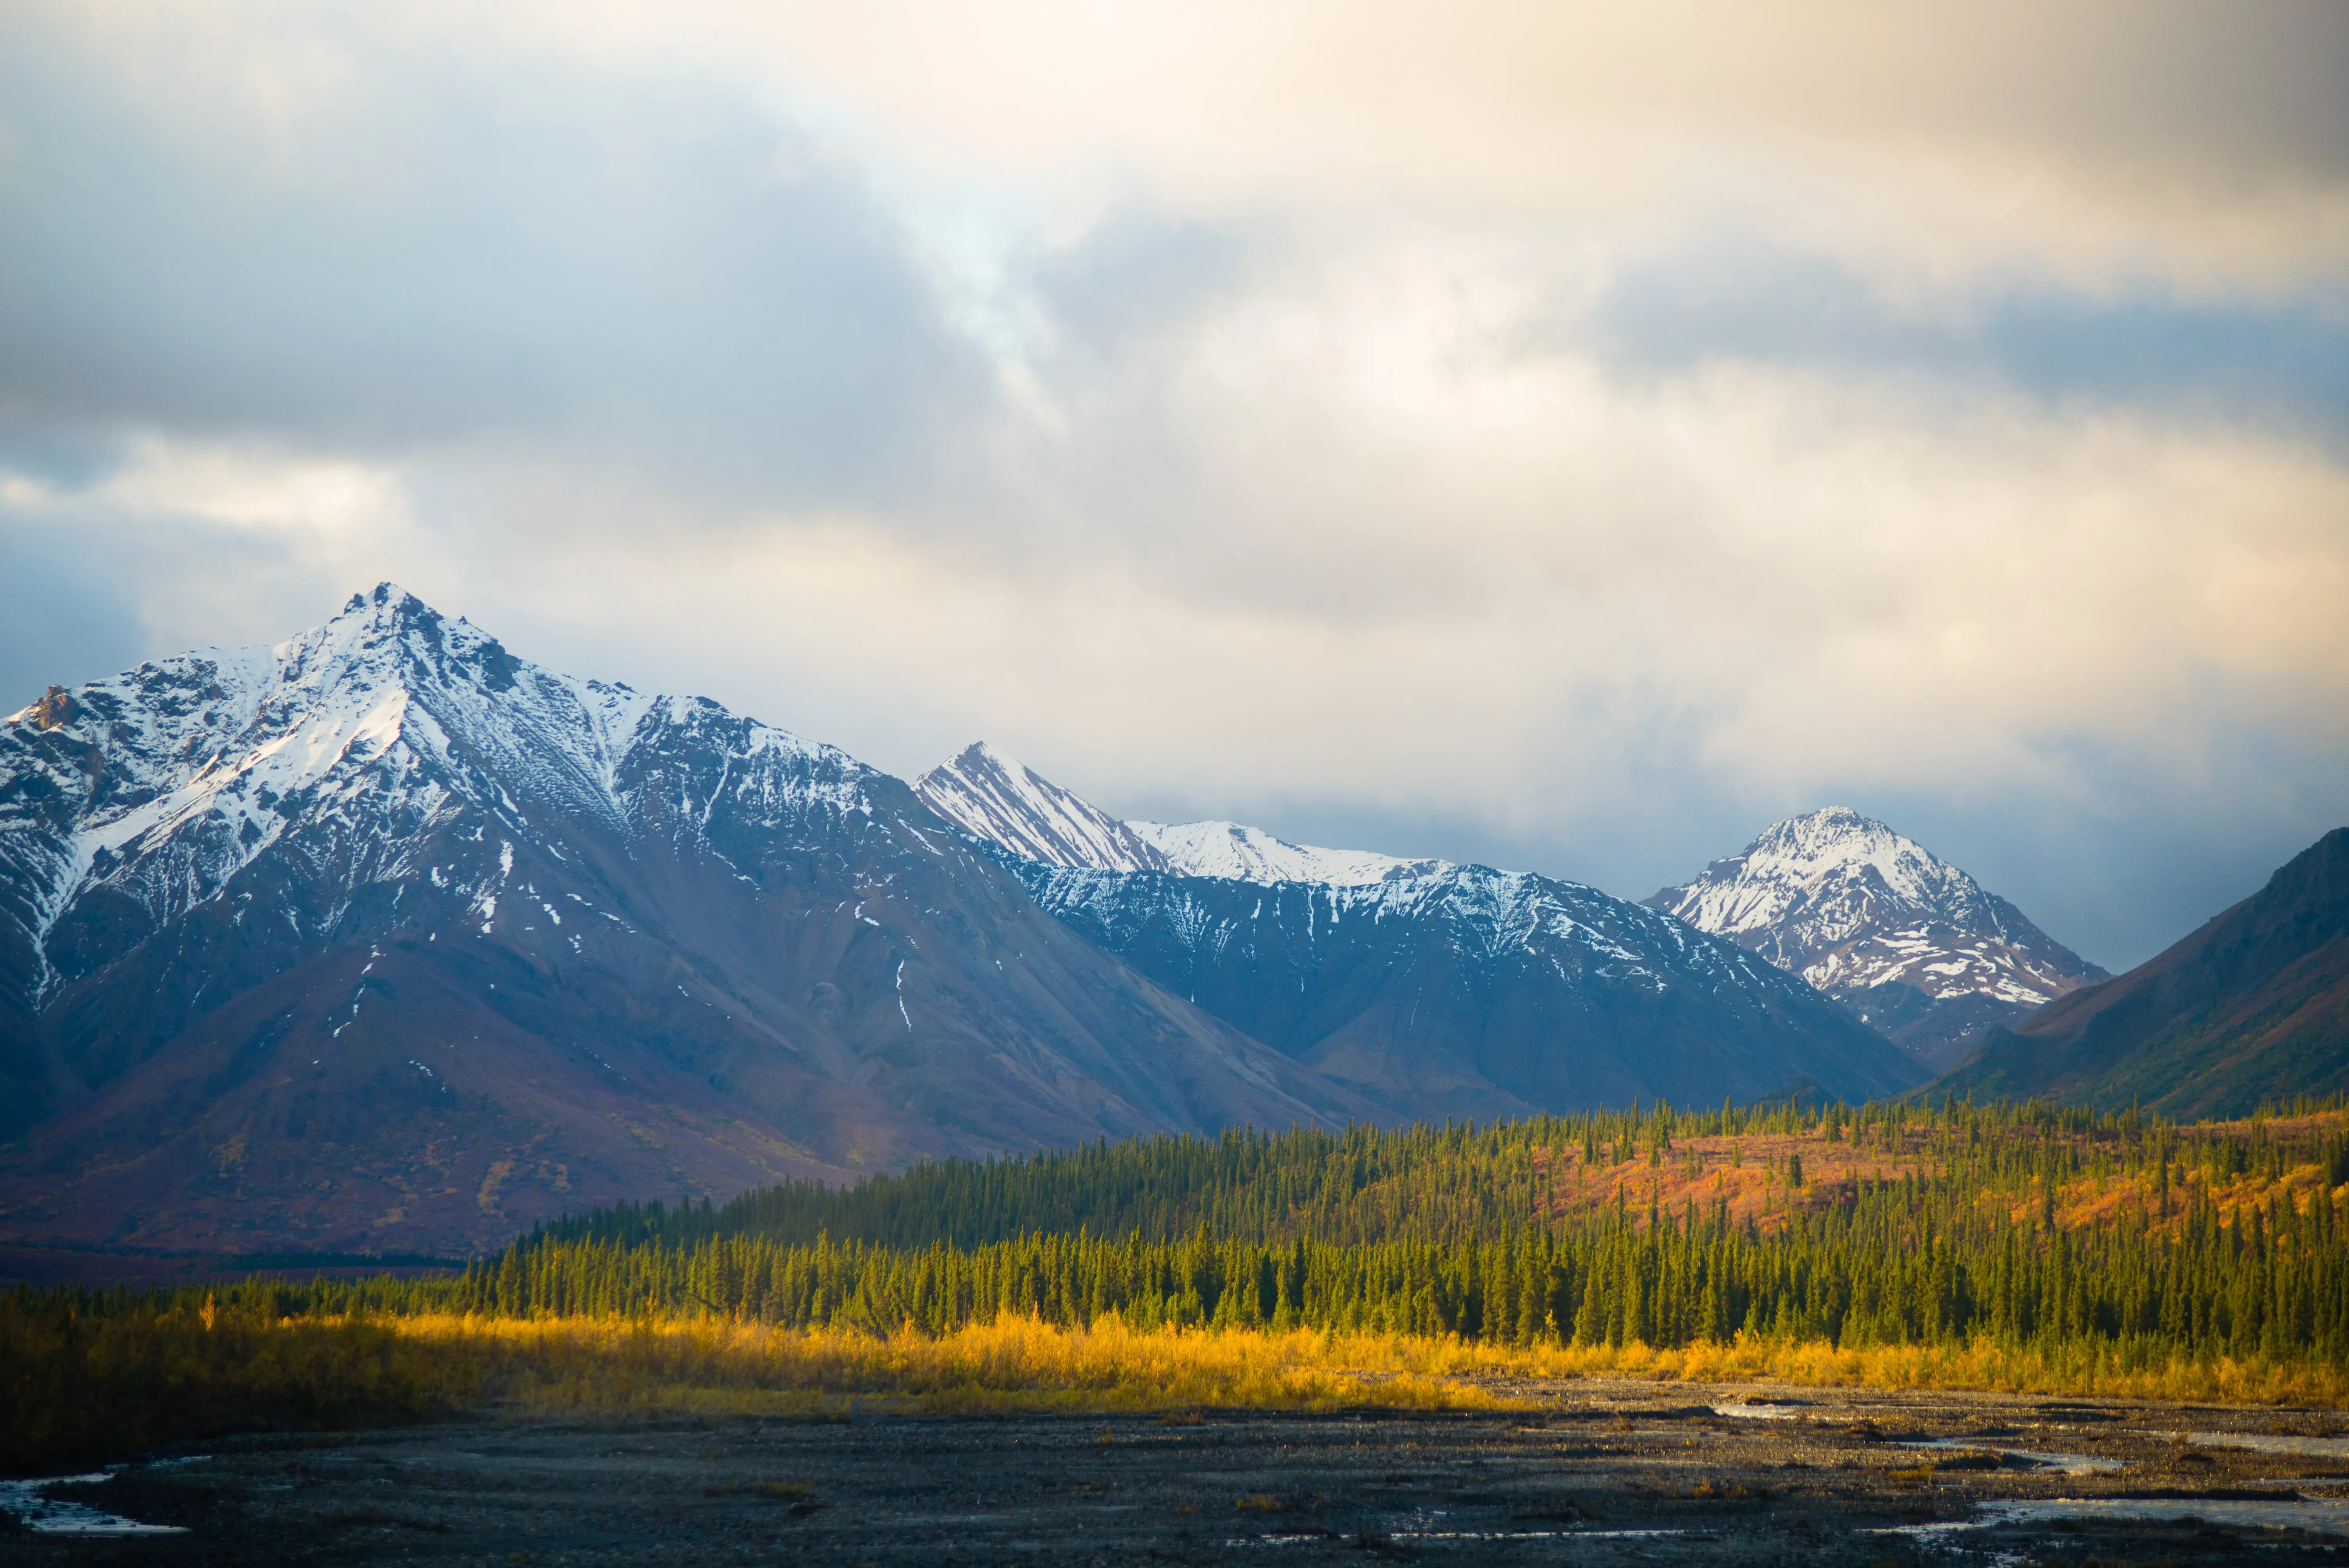 Alaska countryside and snow-capped mountains